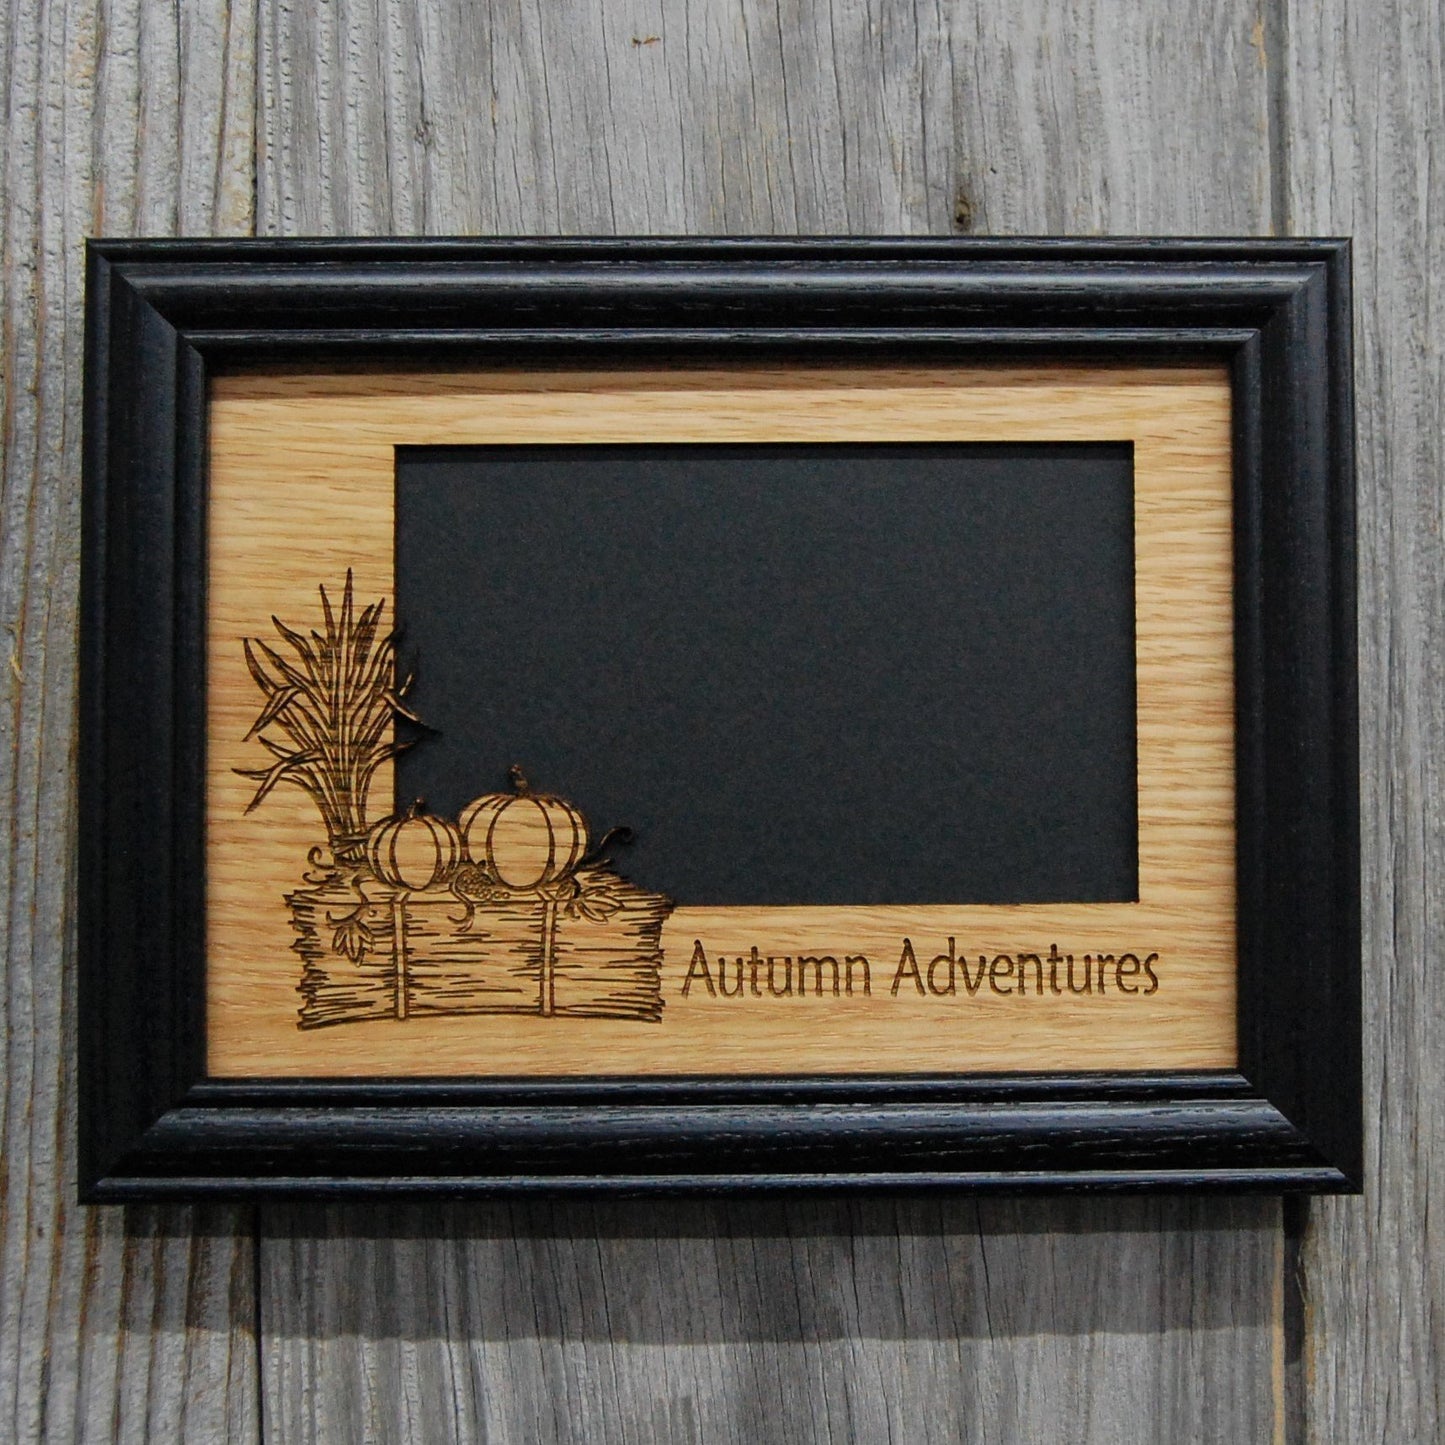 Autumn Adventures Picture Frame - 5x7 Frame Holds 4x6 Photo